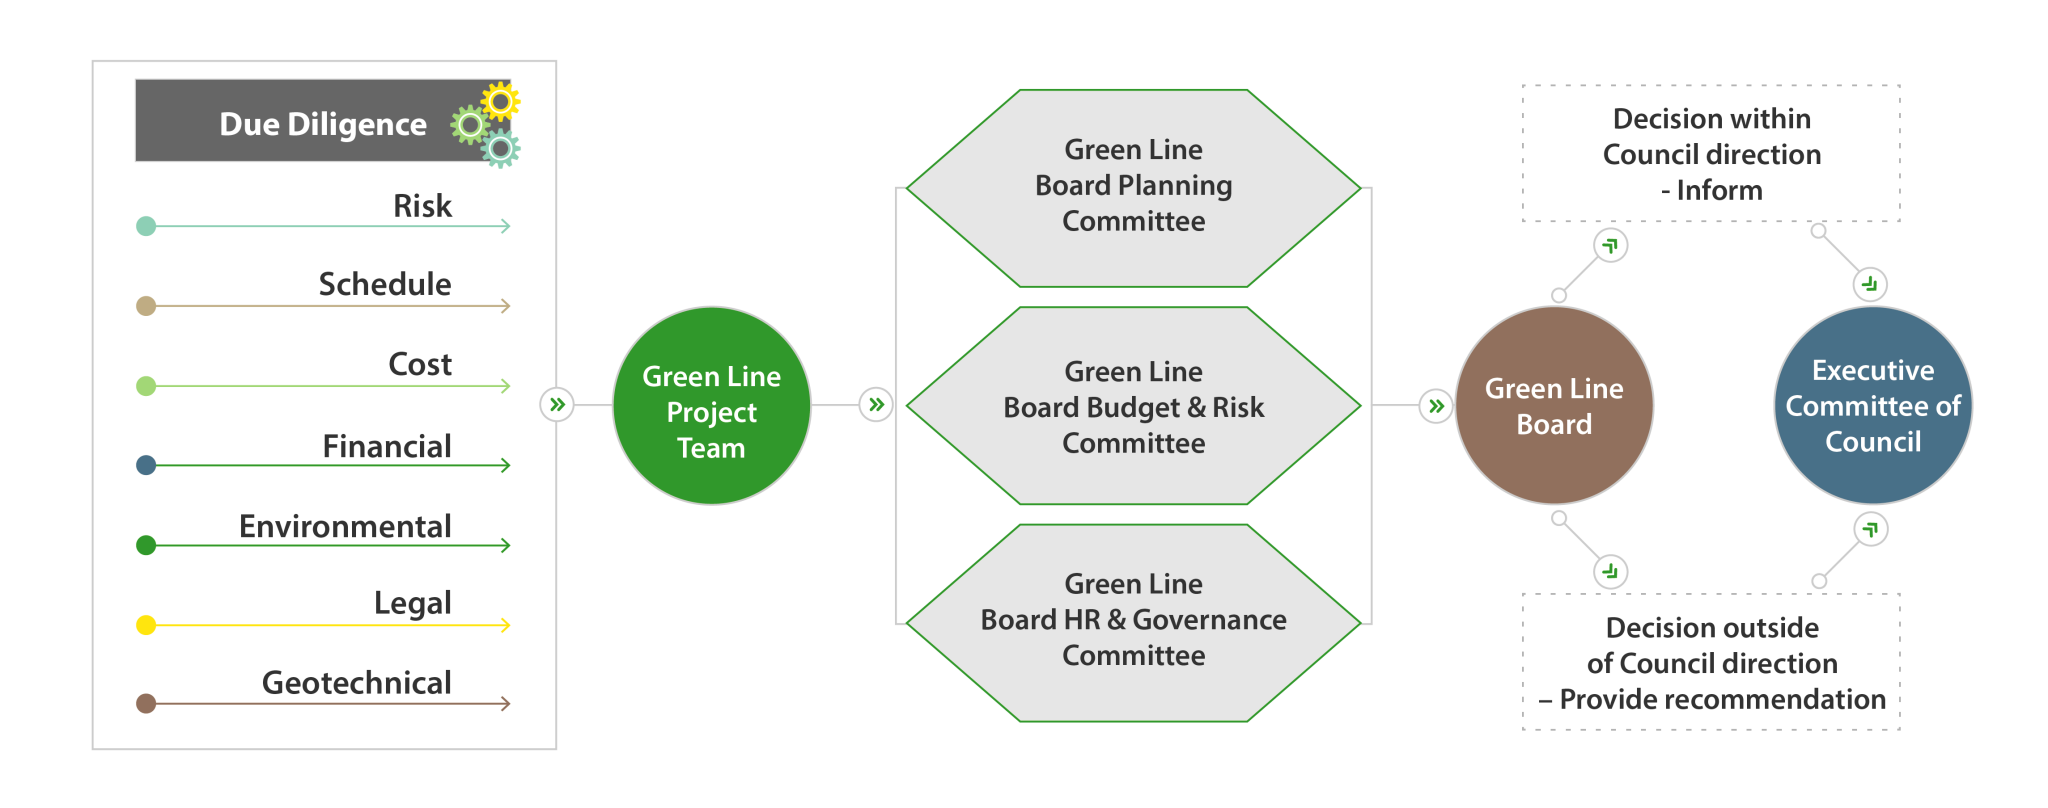 Green Line board due diligence process